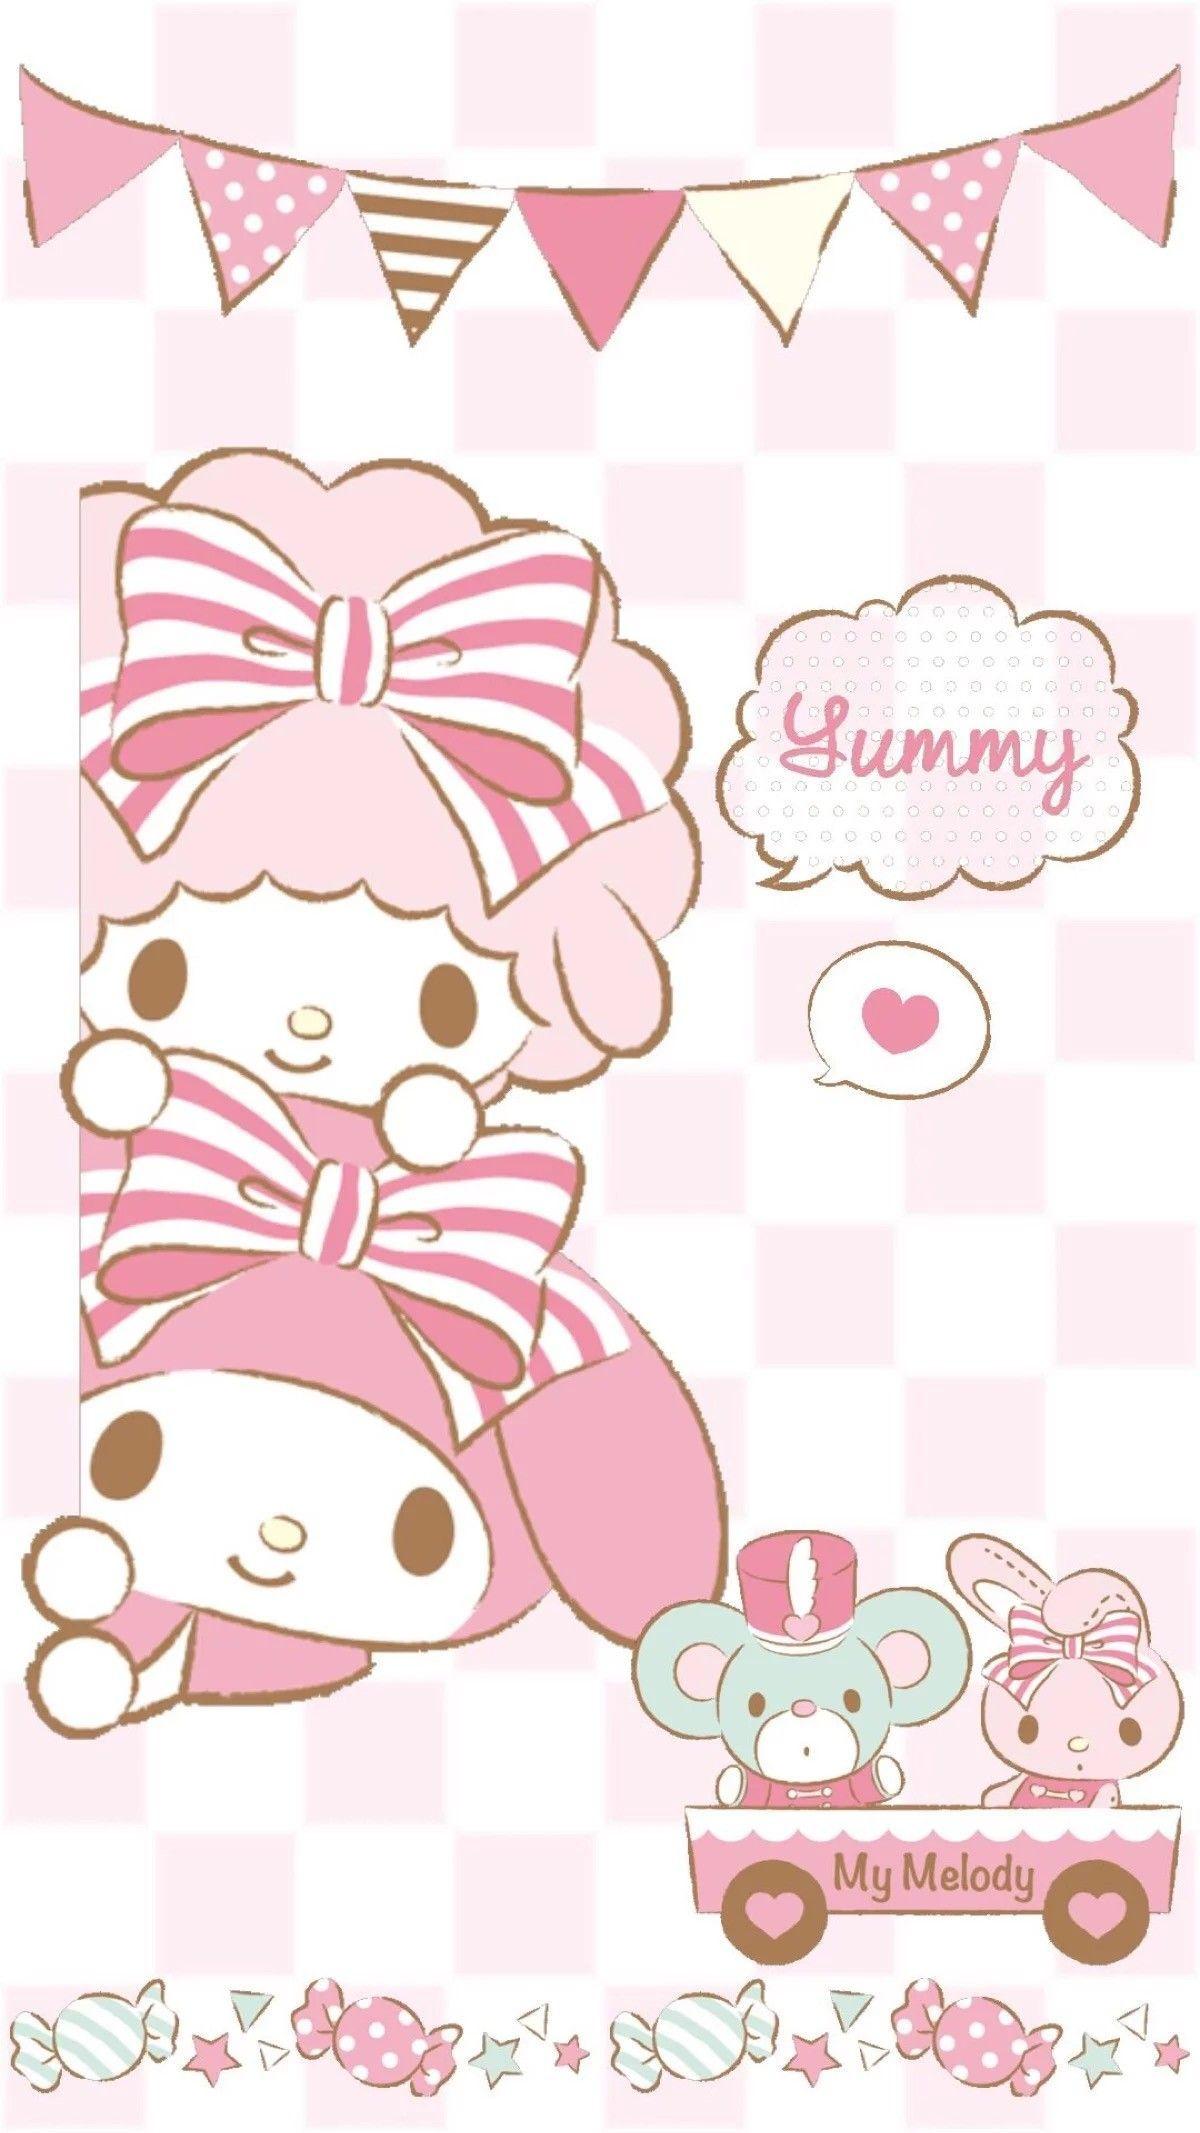 My Melody Wallpaper for iPhone. My Melody. Wallpaper